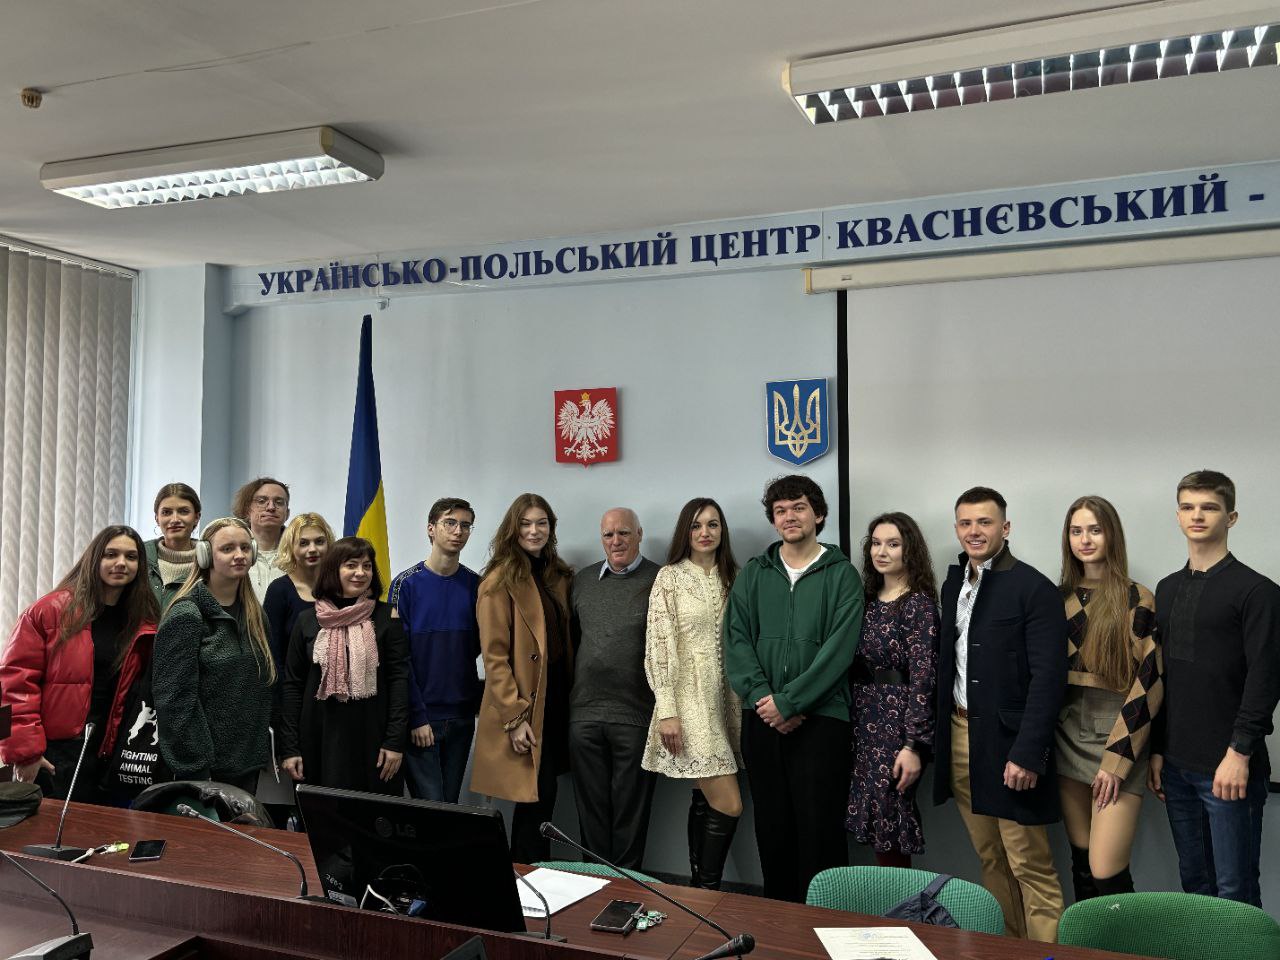 A group of people standing in front of a banner with the inscription ‘UKRAINIAN-POLISH CENTER KVASNEVSKY’ and the coats of arms of Ukraine and Poland. 